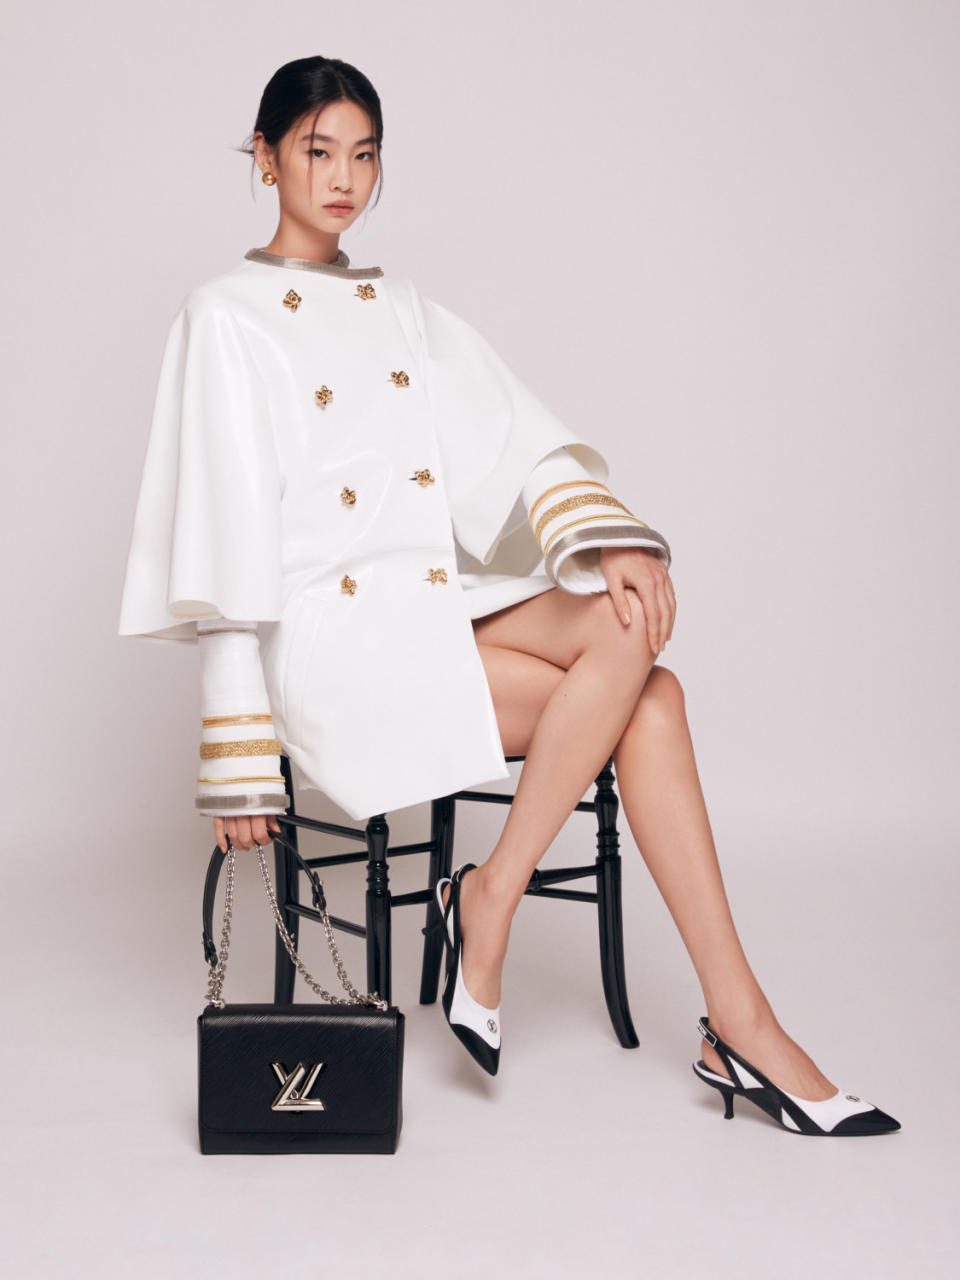 HoYeon Jung is the newest global ambassador for Louis Vuitton. - Credit: Courtesy of Louis Vuitton